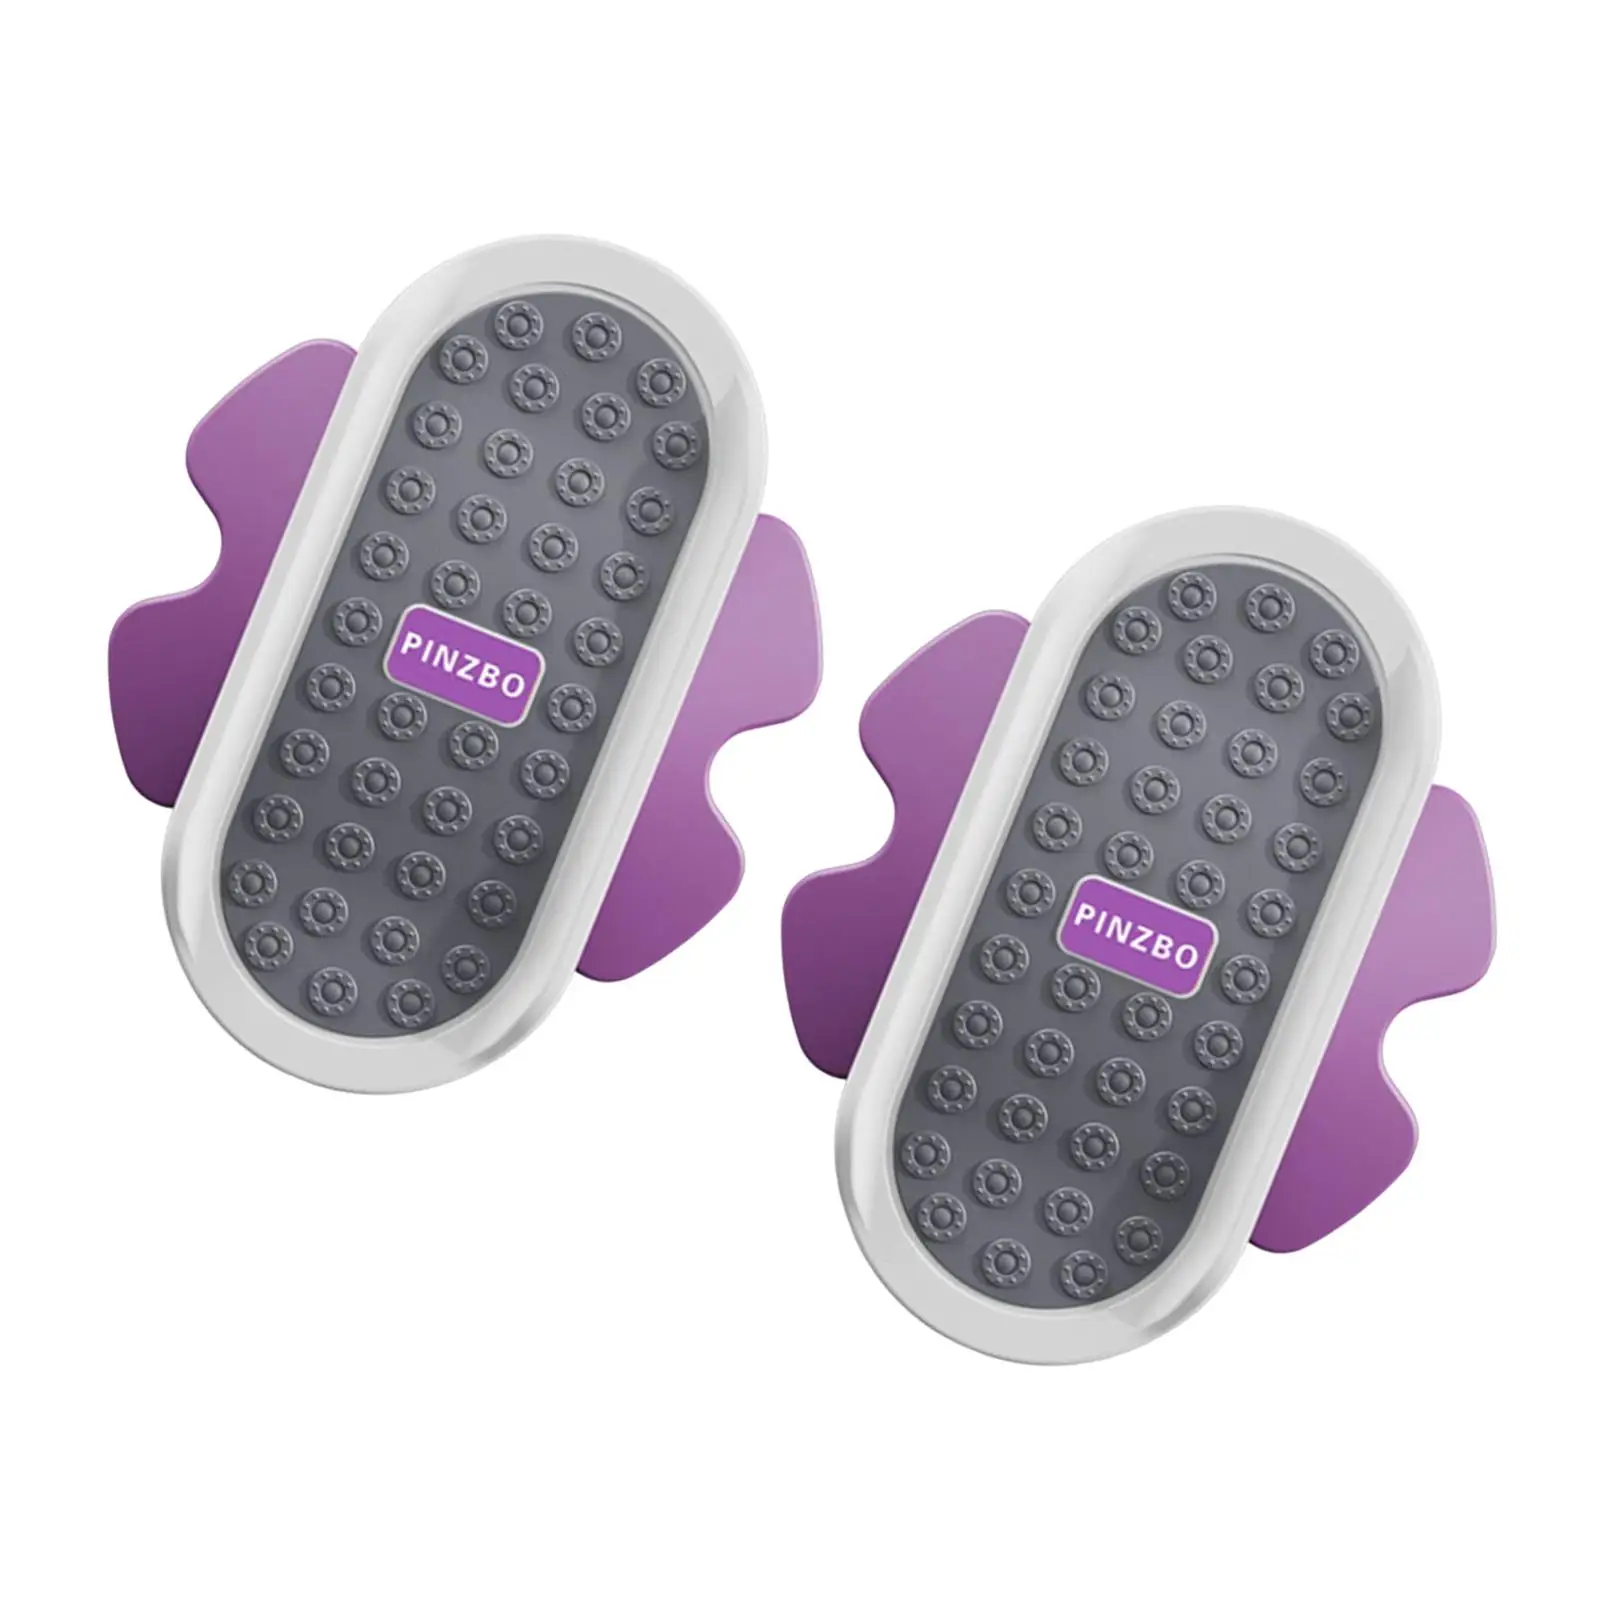 2x Waist Twisting Disc Aerobic Exercise Balance Boards Massage Foot Sole Equipment AB Twisting Board for Fitness Full Body